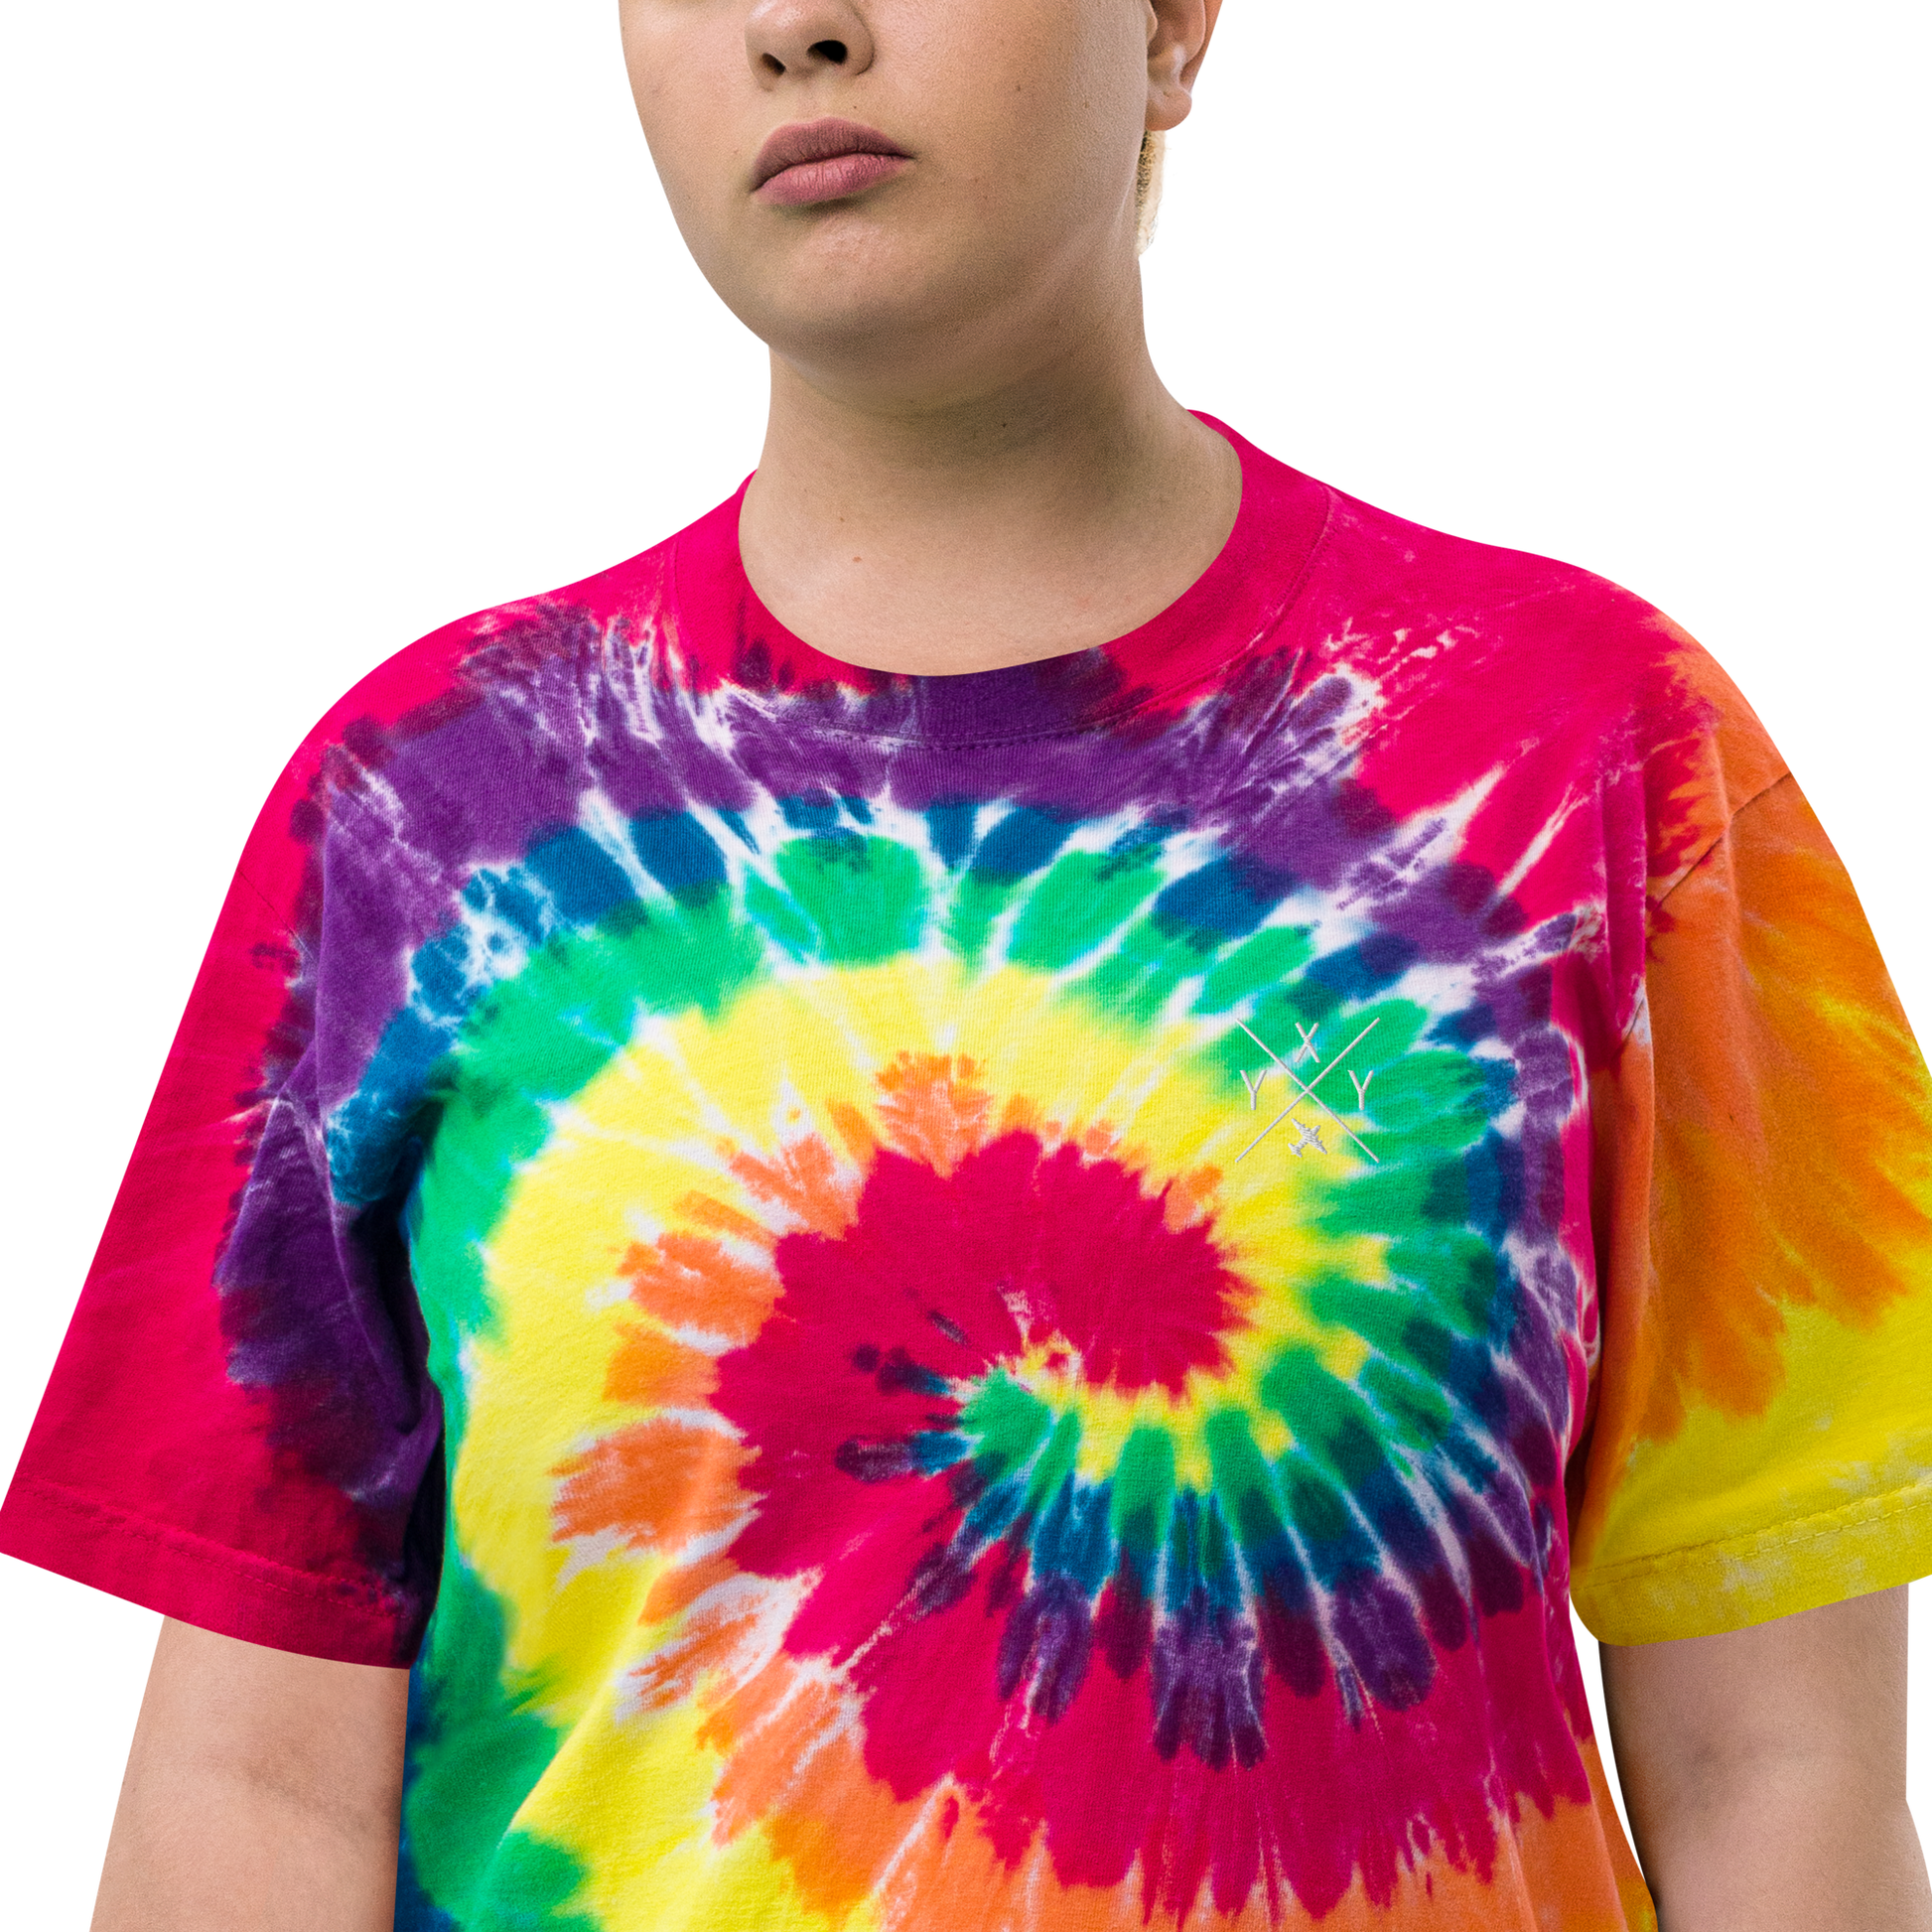 YHM Designs - YXY Whitehorse Oversized Tie-Dye T-Shirt - Crossed-X Design with Airport Code and Vintage Propliner - White Embroidery - Image 15